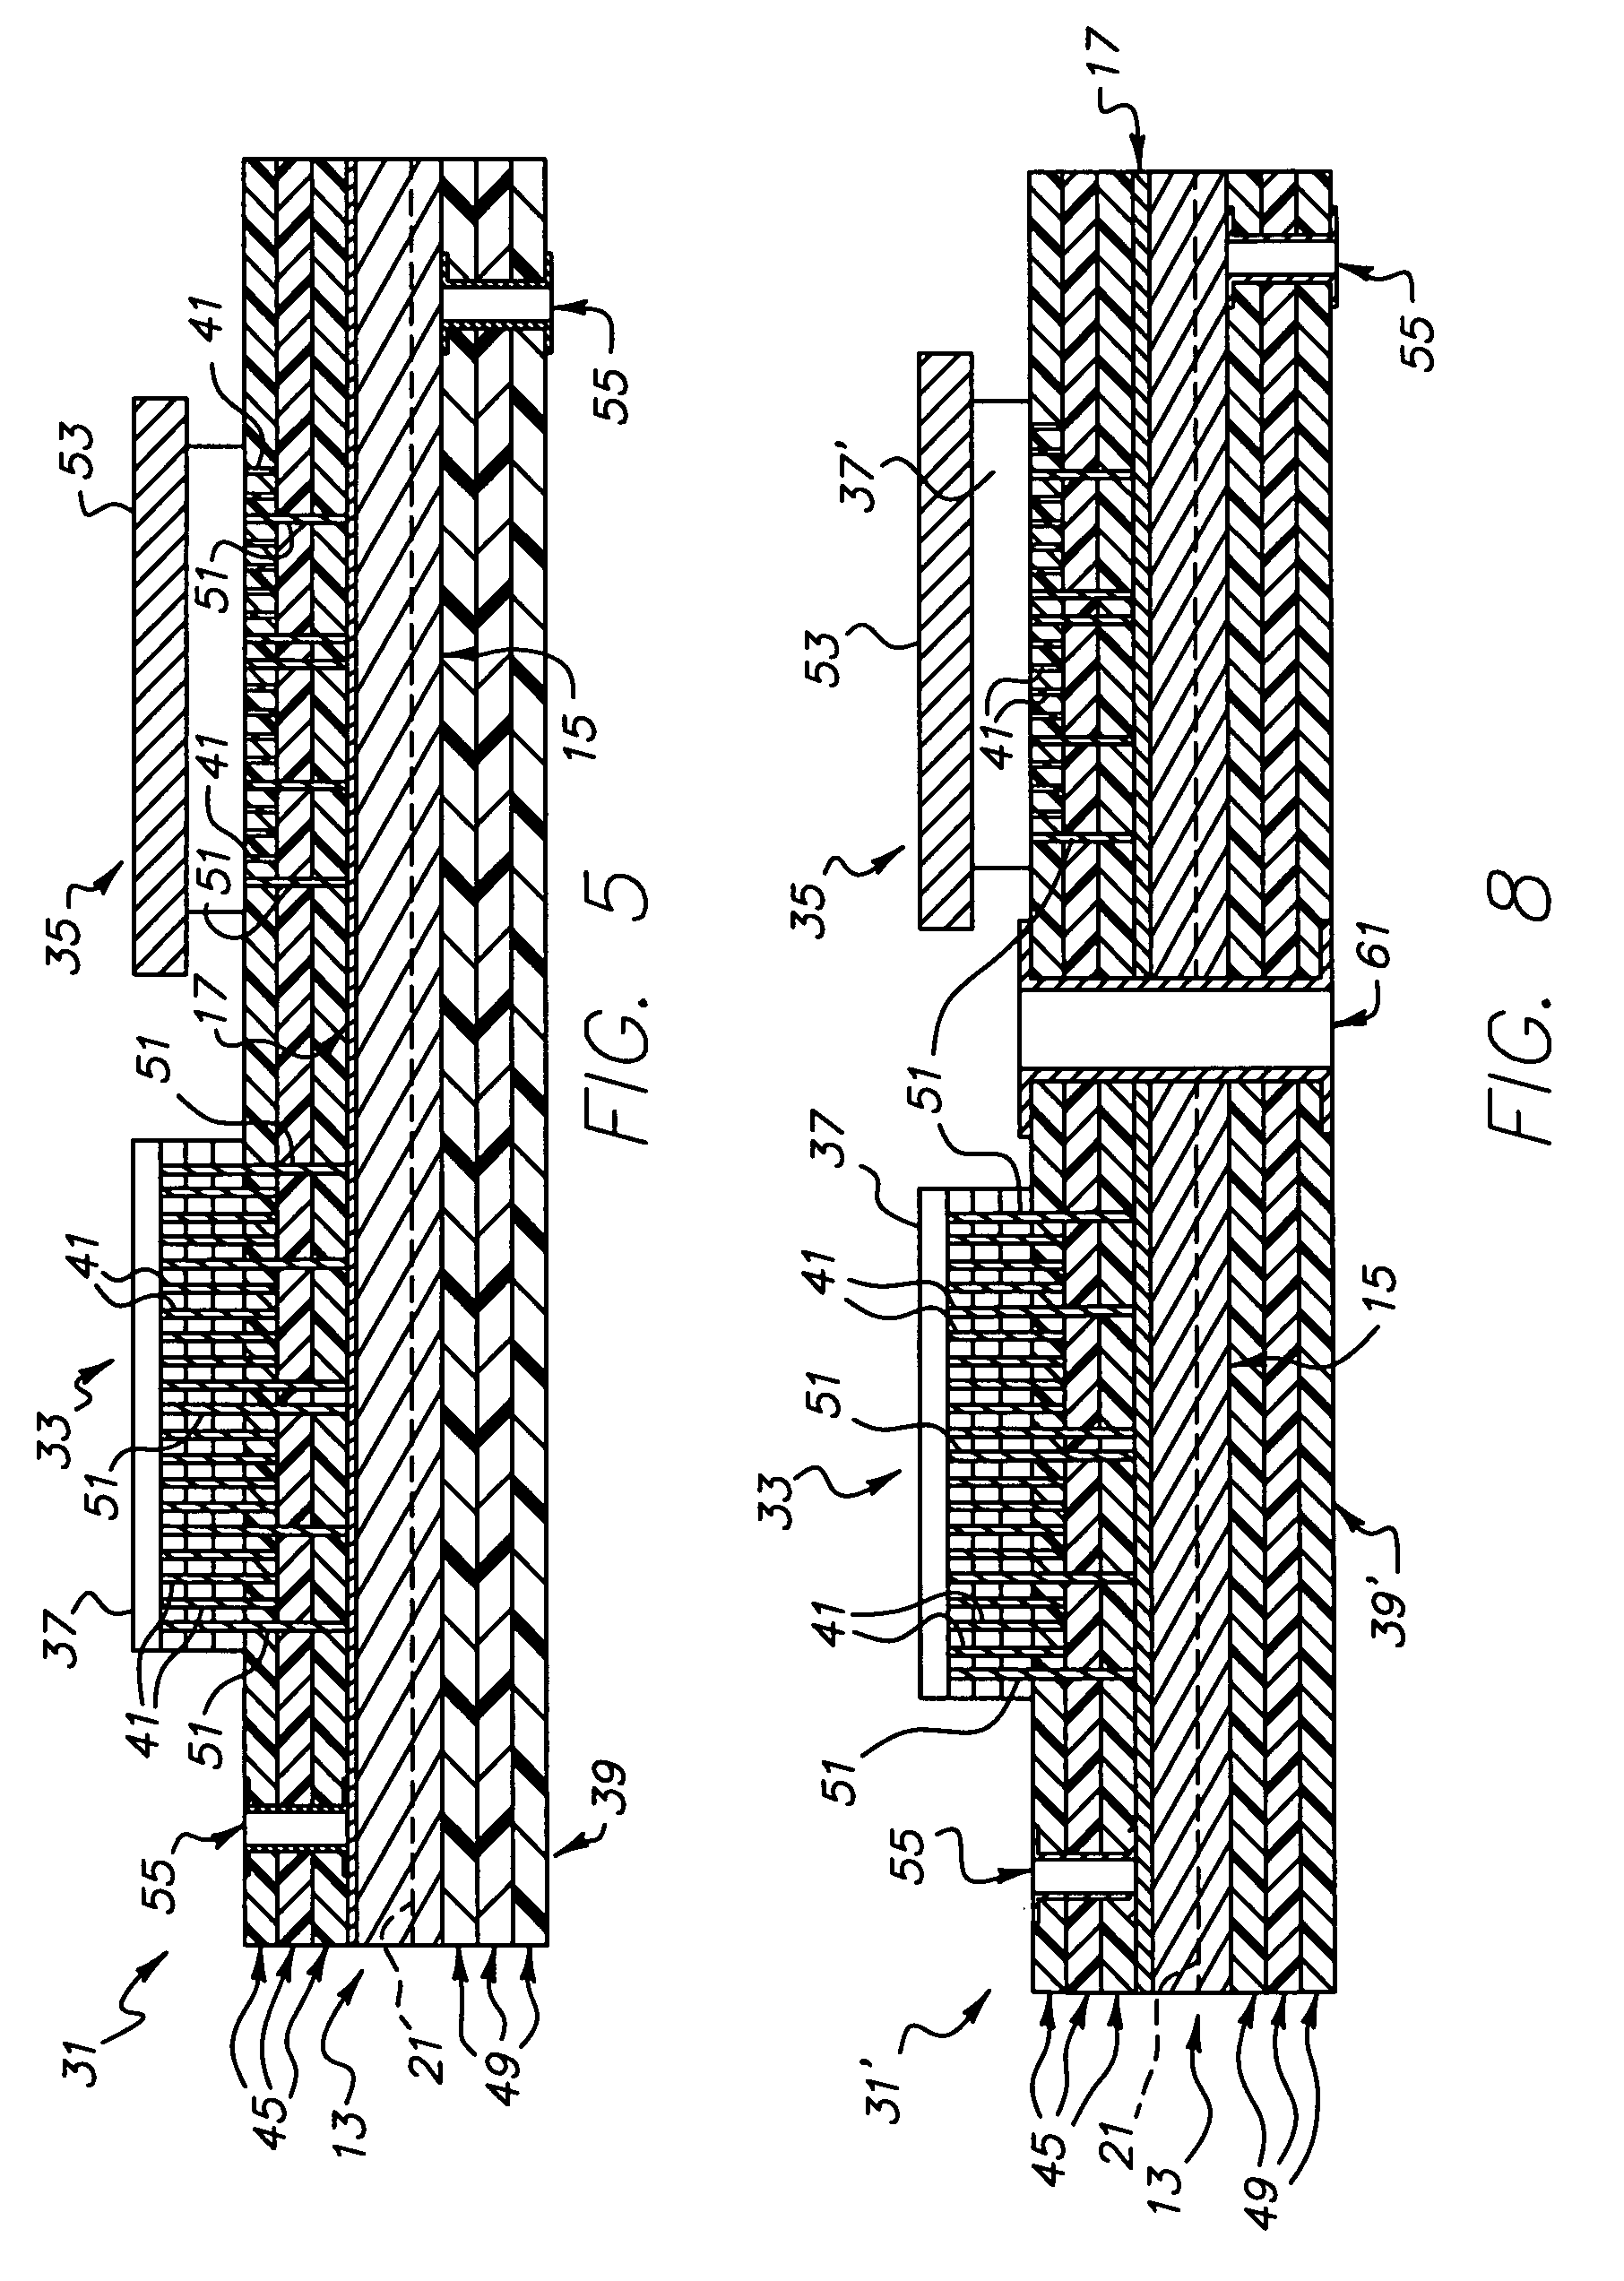 Circuitized substrate with internal cooling structure and electrical assembly utilizing same